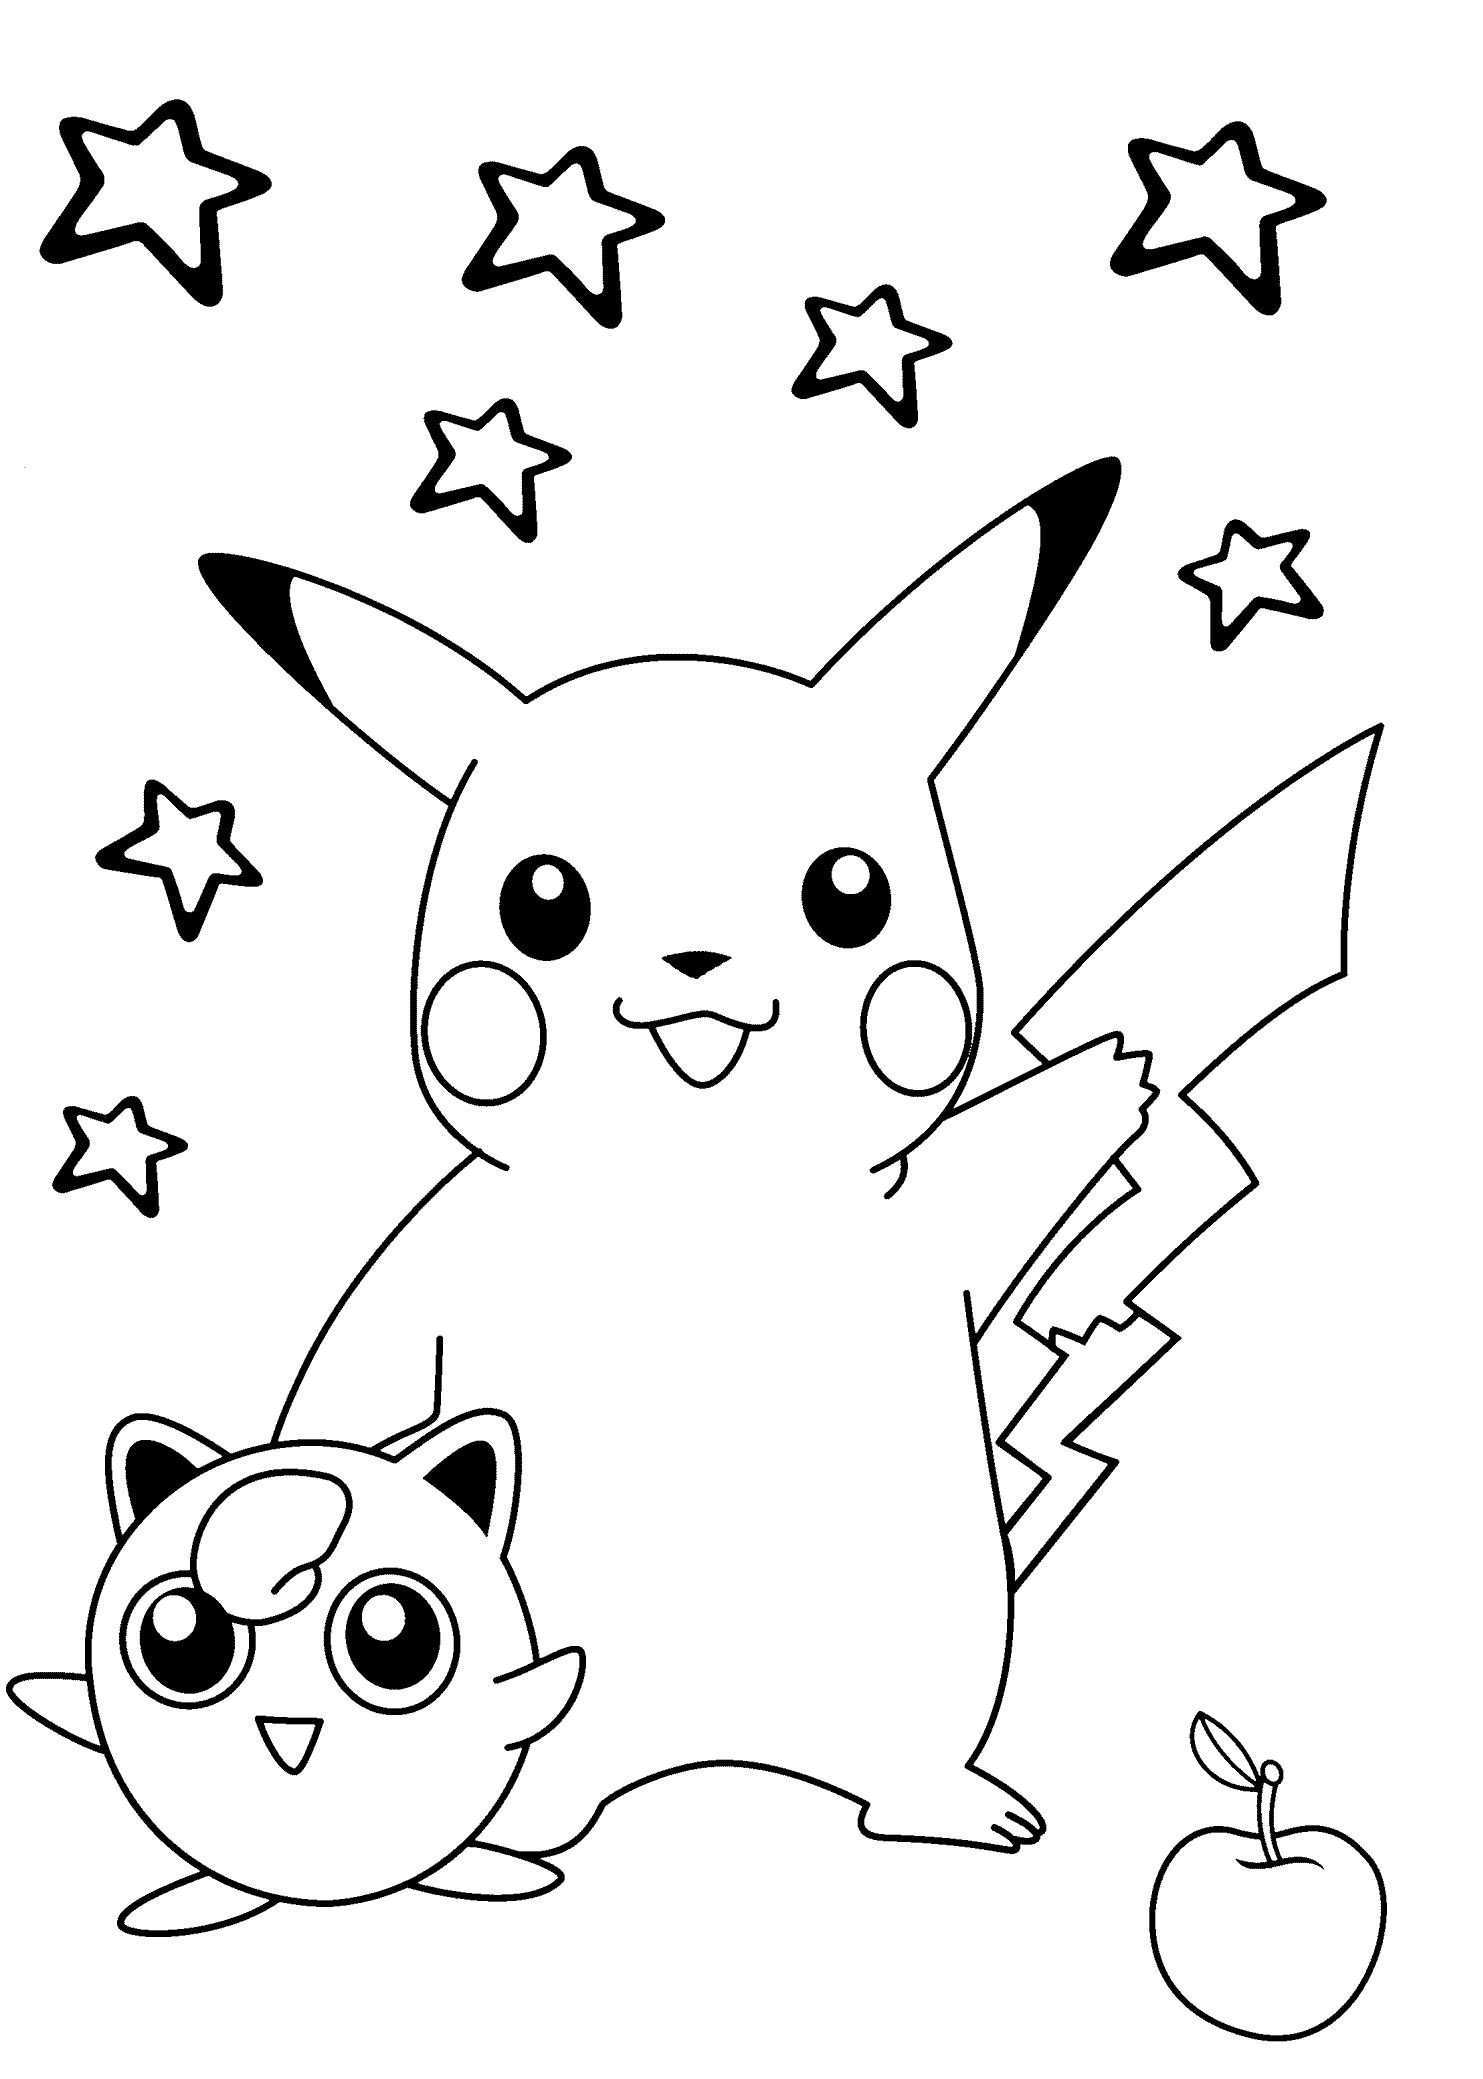 Pokemon Jigglypuff Coloring Pages From The Thousand Images On The Web About Pokemon J